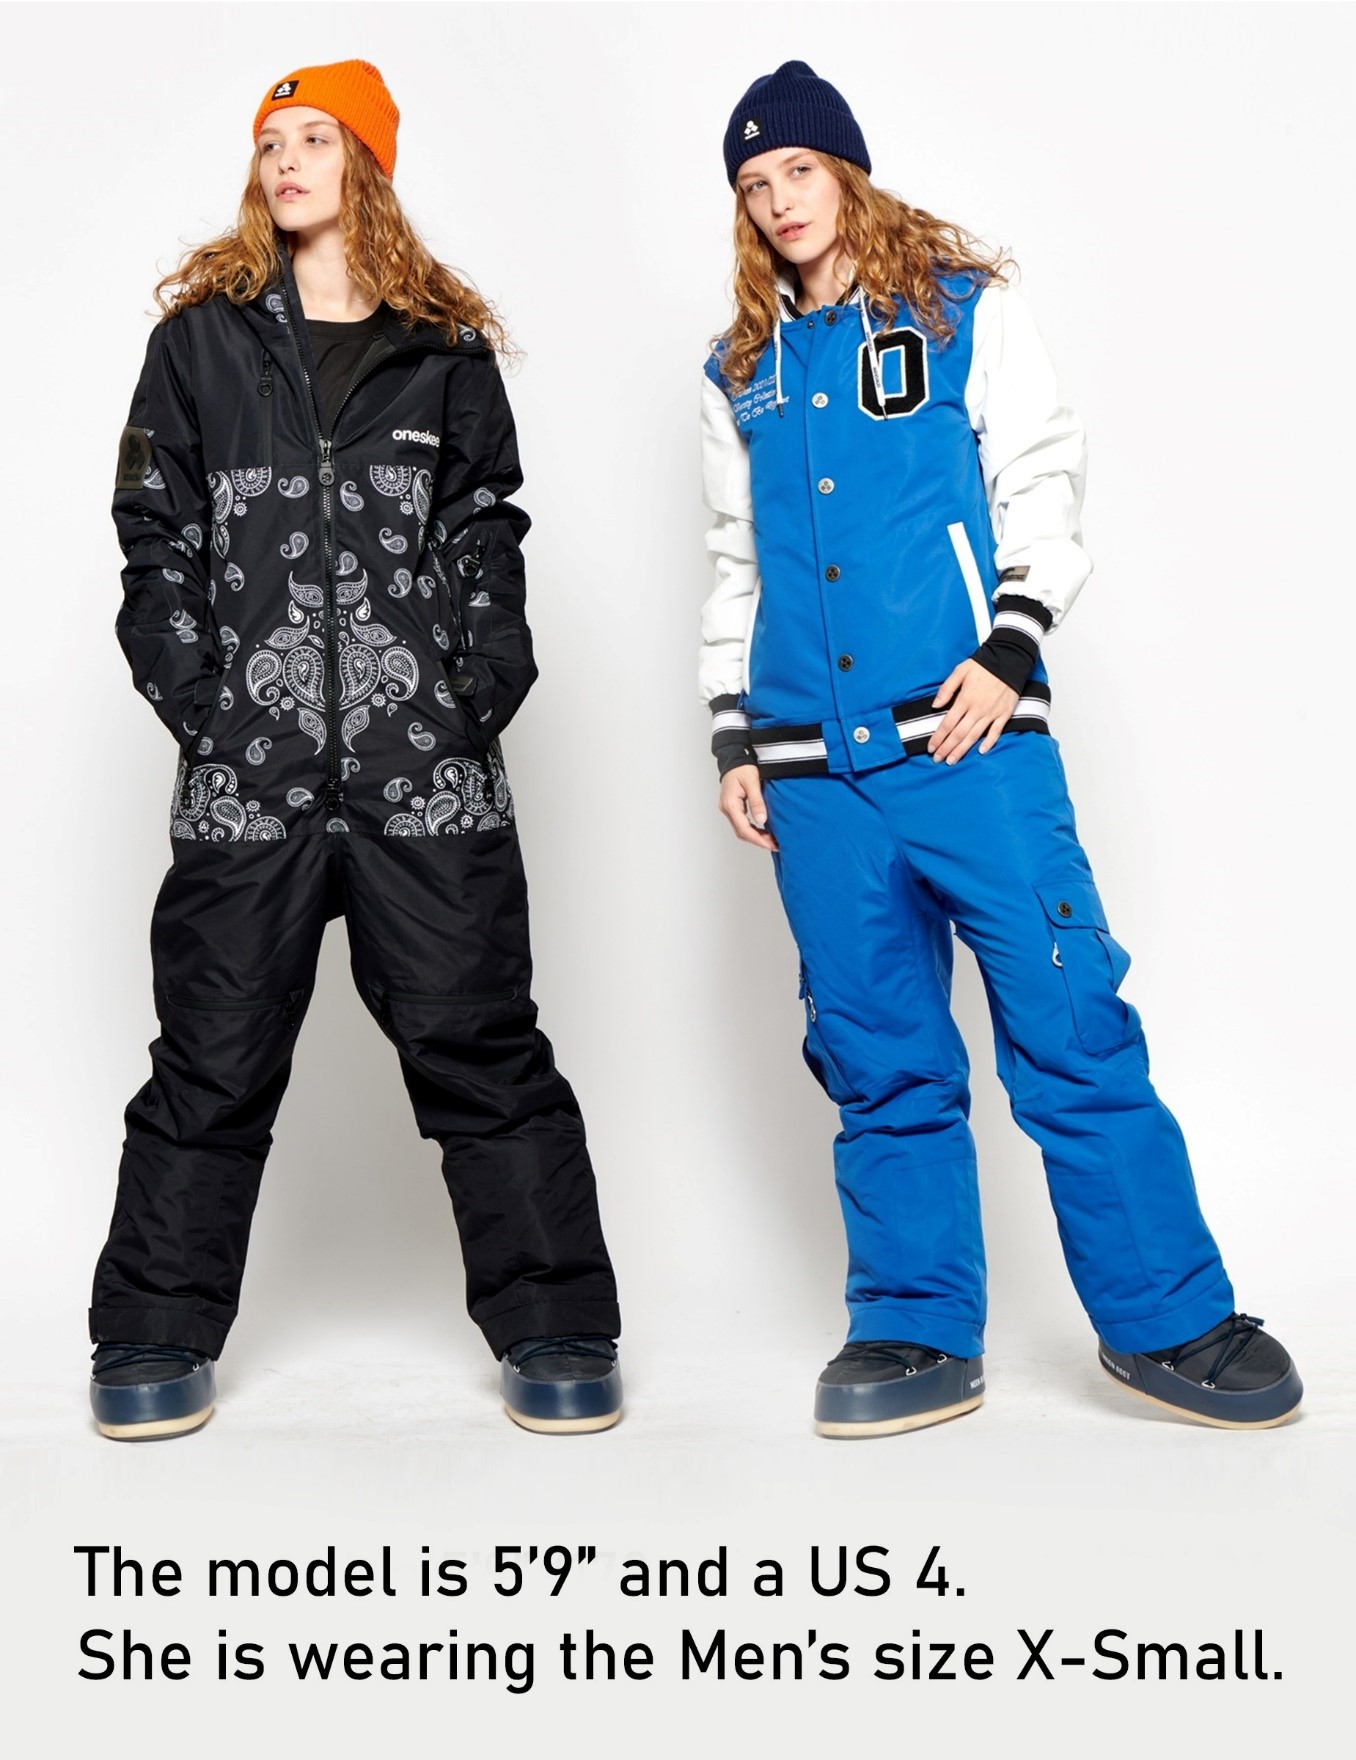 Female modelling two Ski Suits. The model is 5'9" and a US 4. She is wearing the Men's size X-Small.